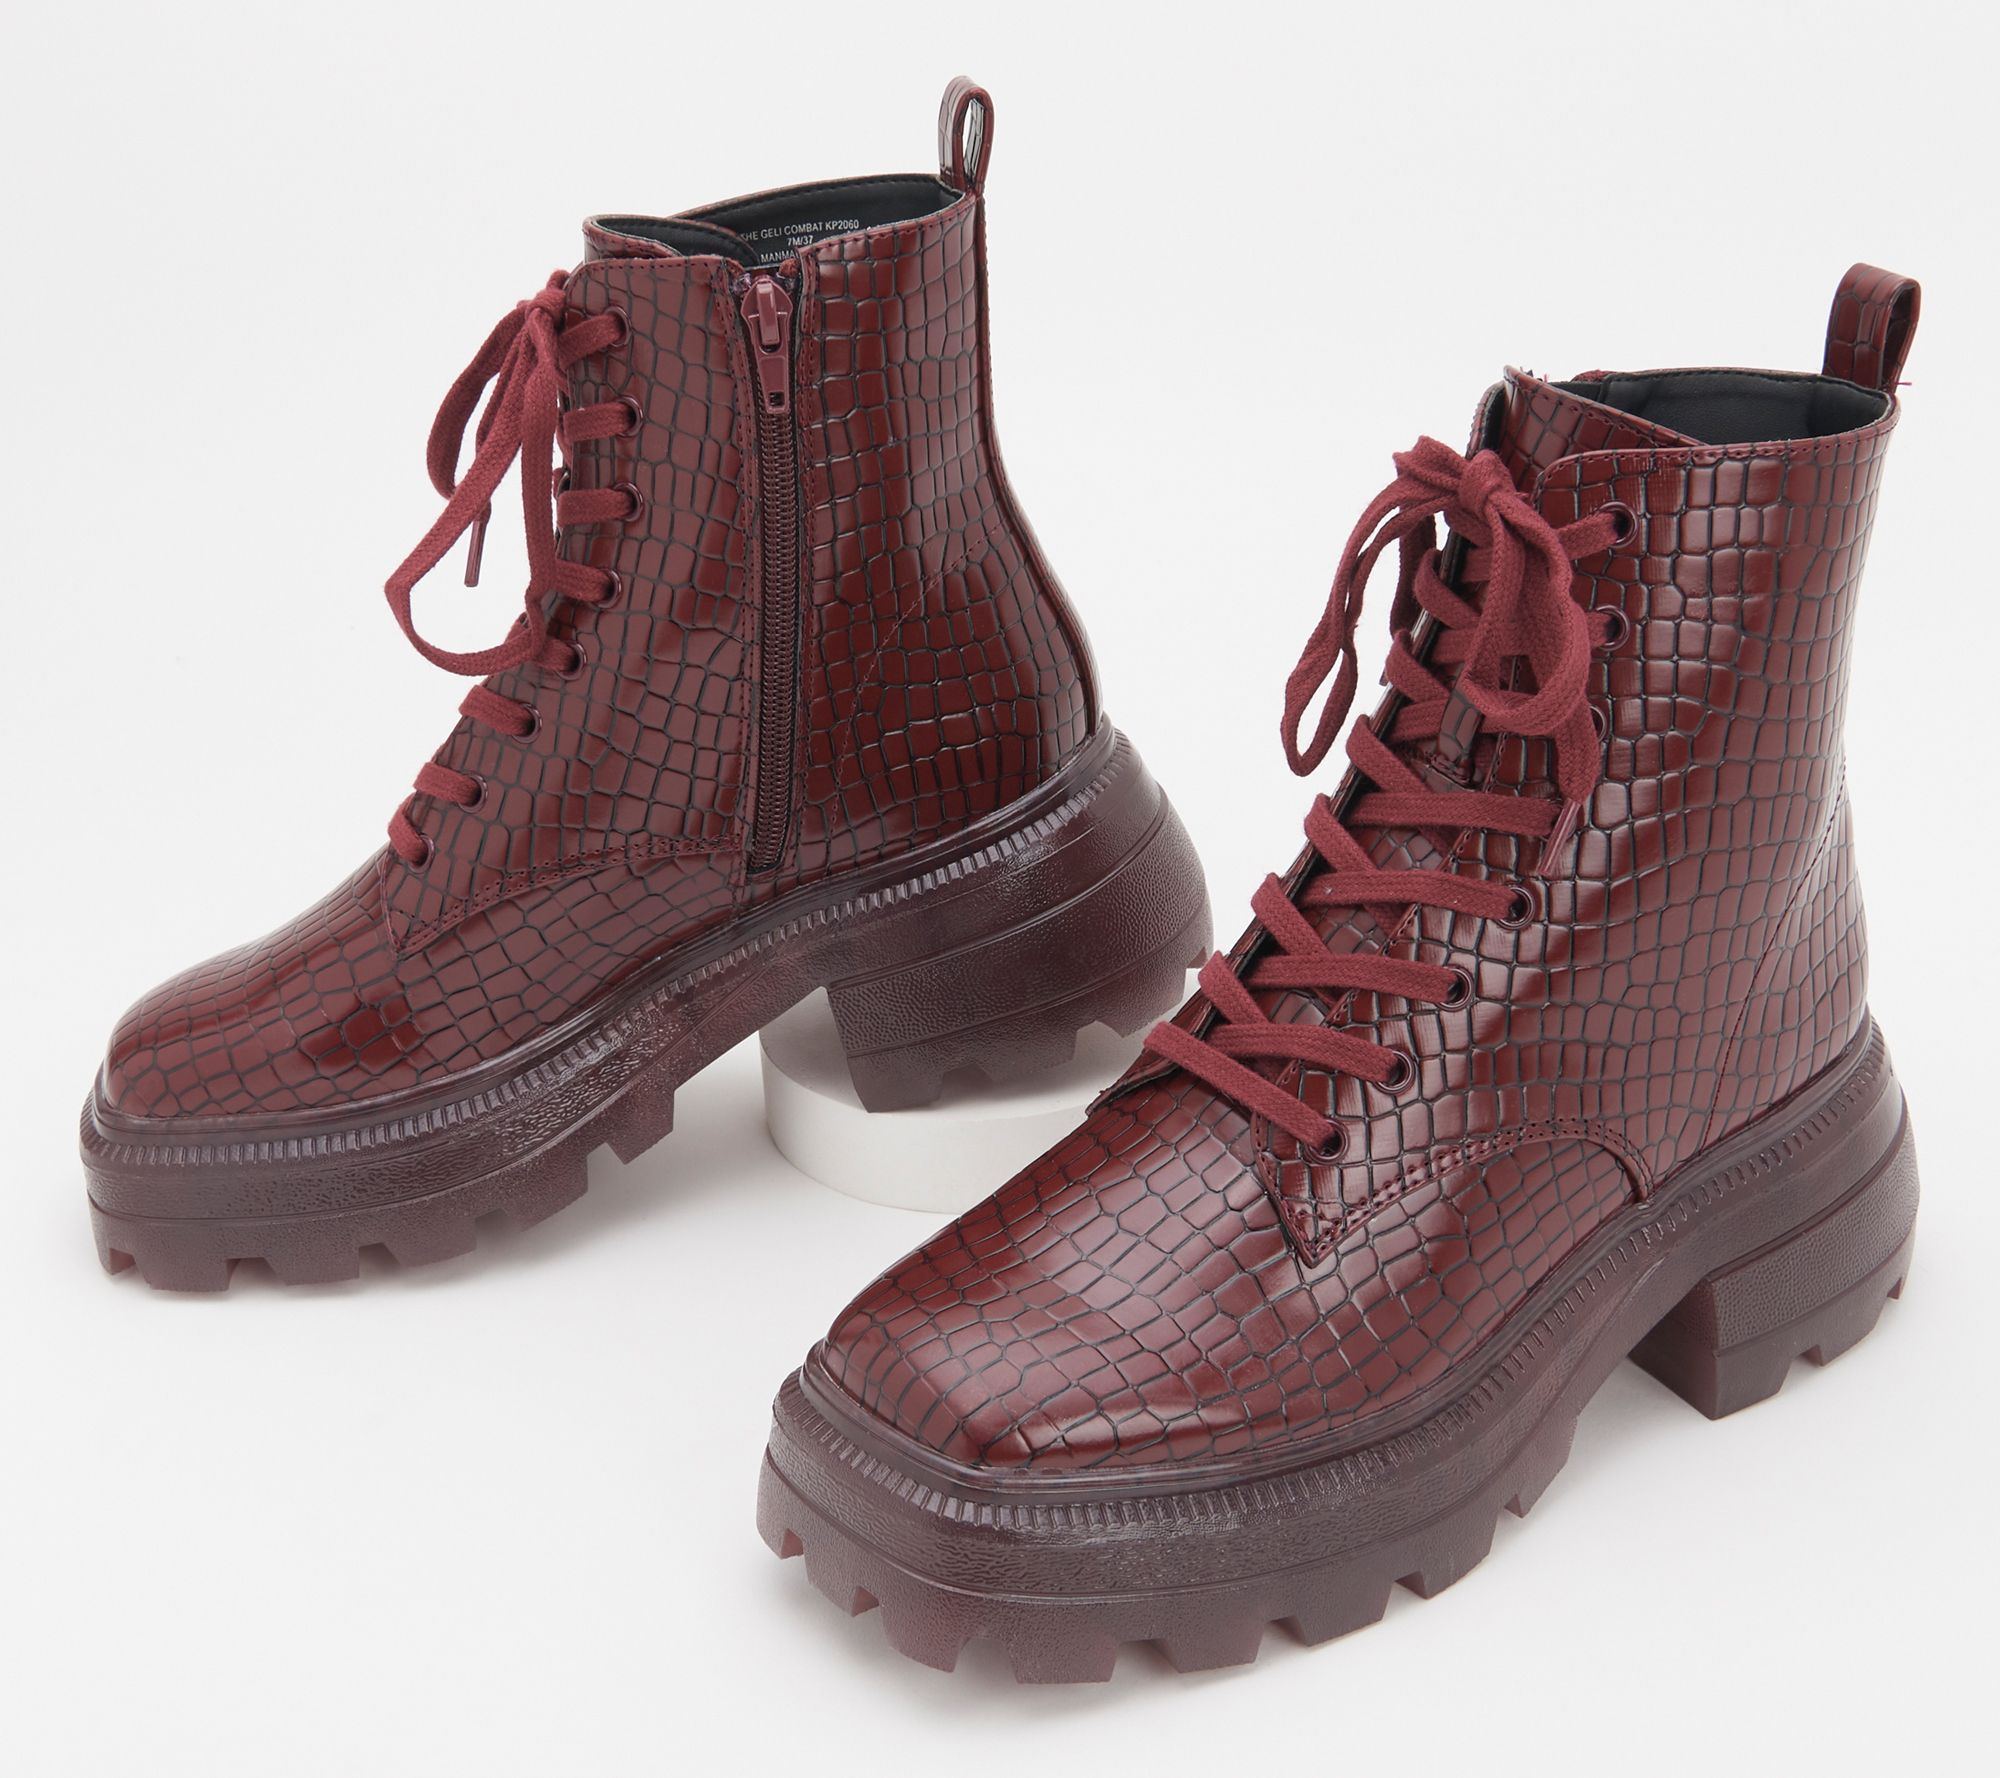 Katy Perry Geli Lace-Up Combat Boots - QVC.com